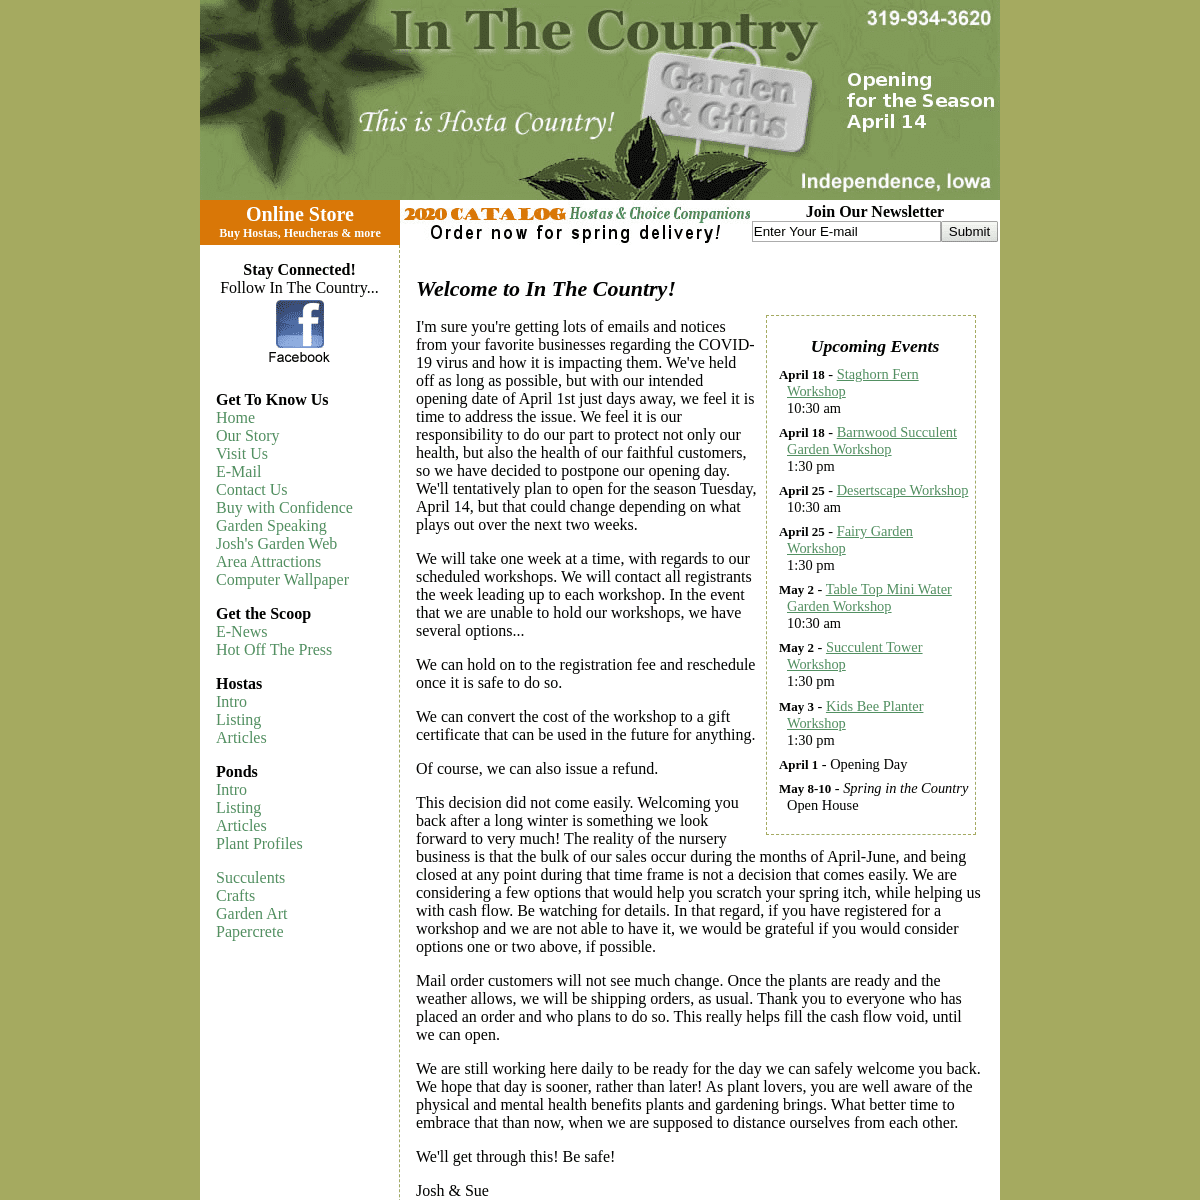 A complete backup of inthecountrygardenandgifts.com